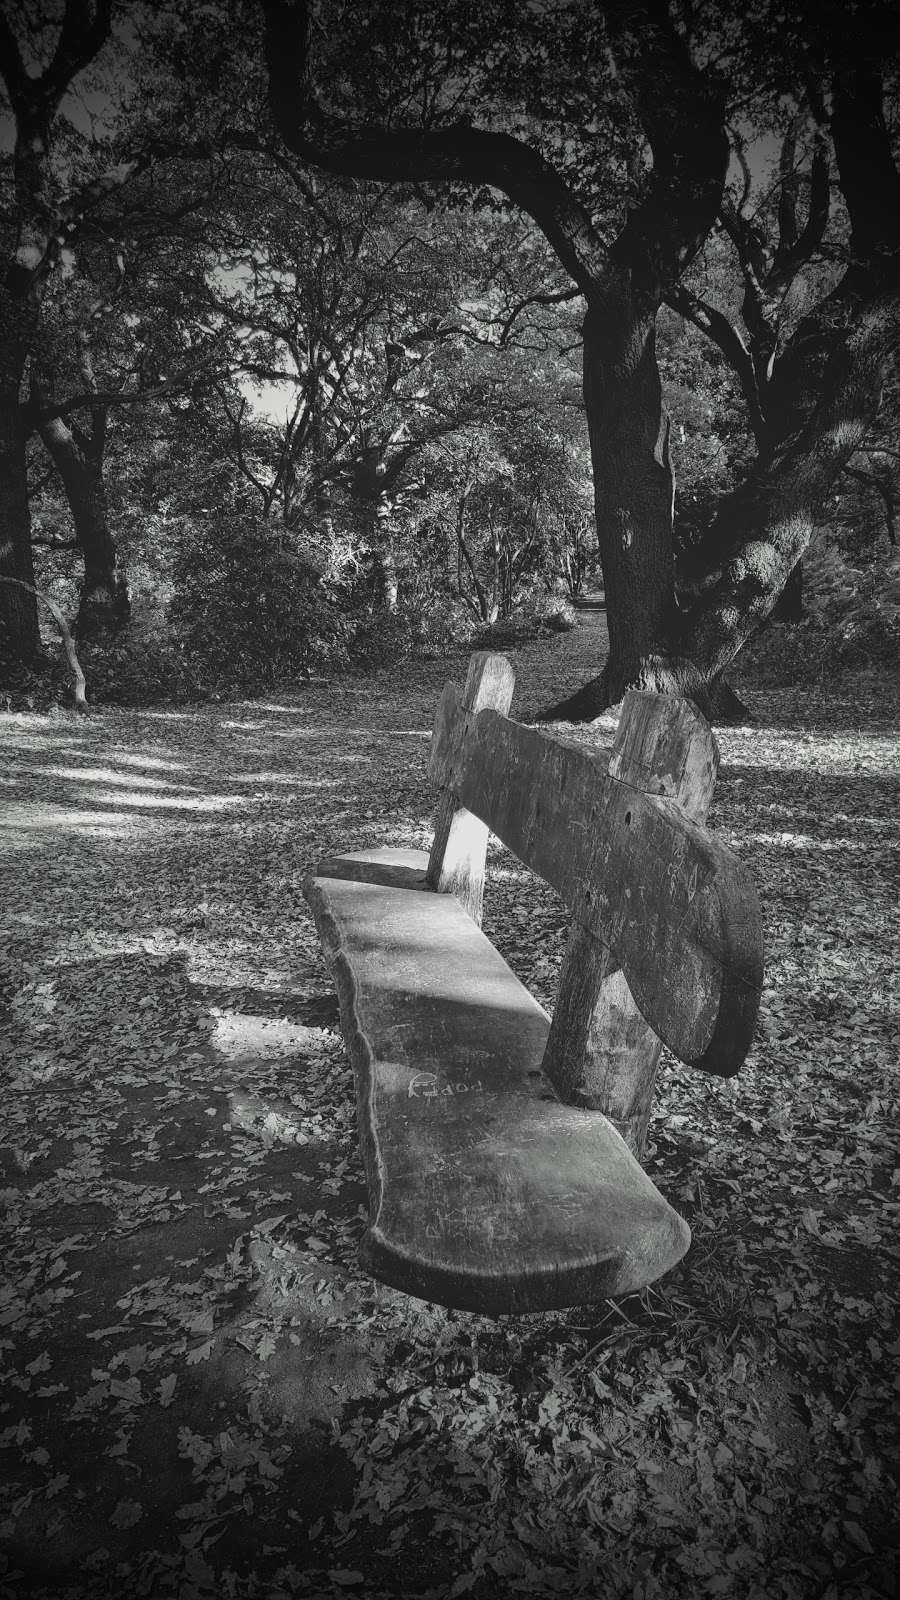 Shadow Shot Sunday: How Cool Is This Bench!?